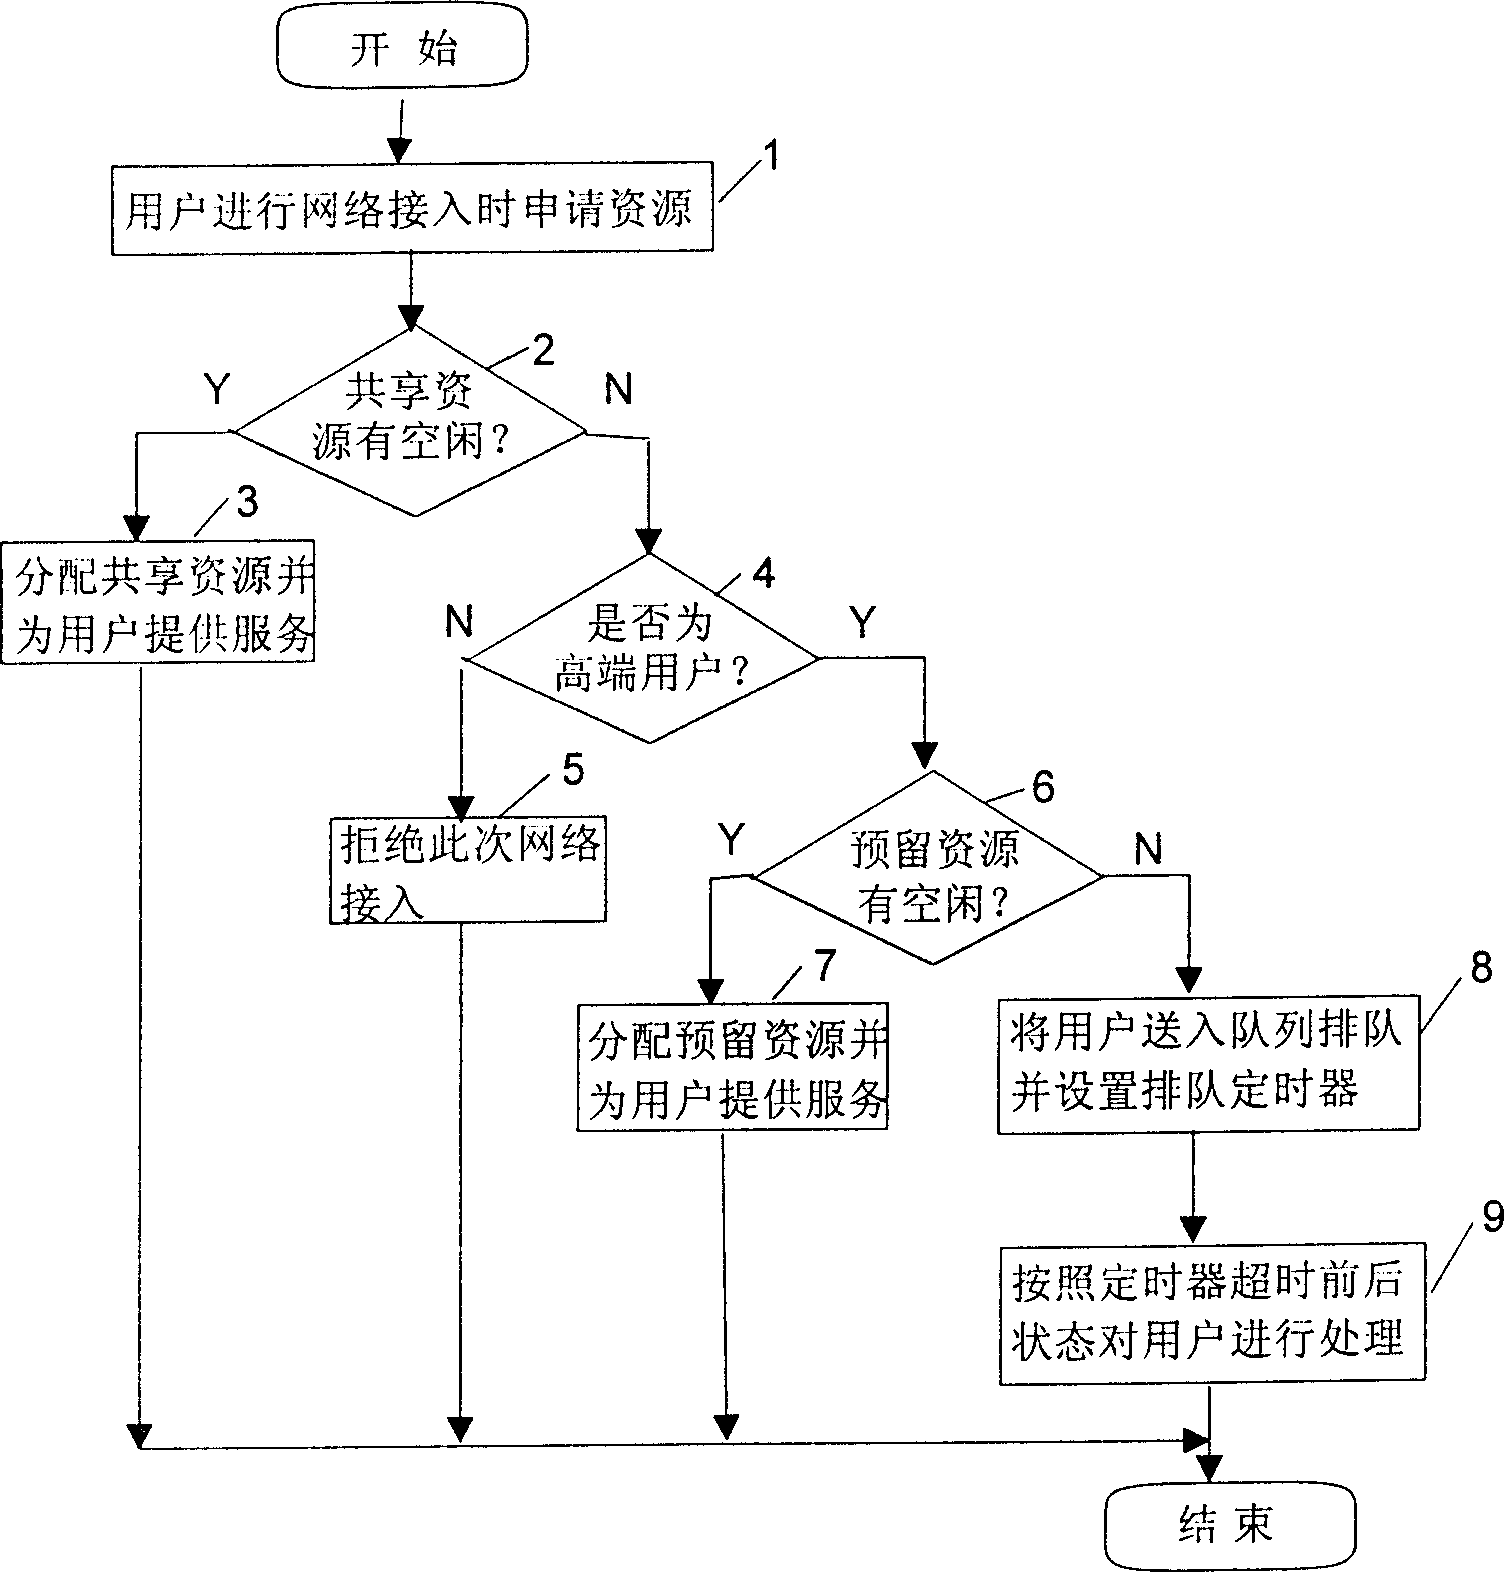 Method for resource planning method in communication system